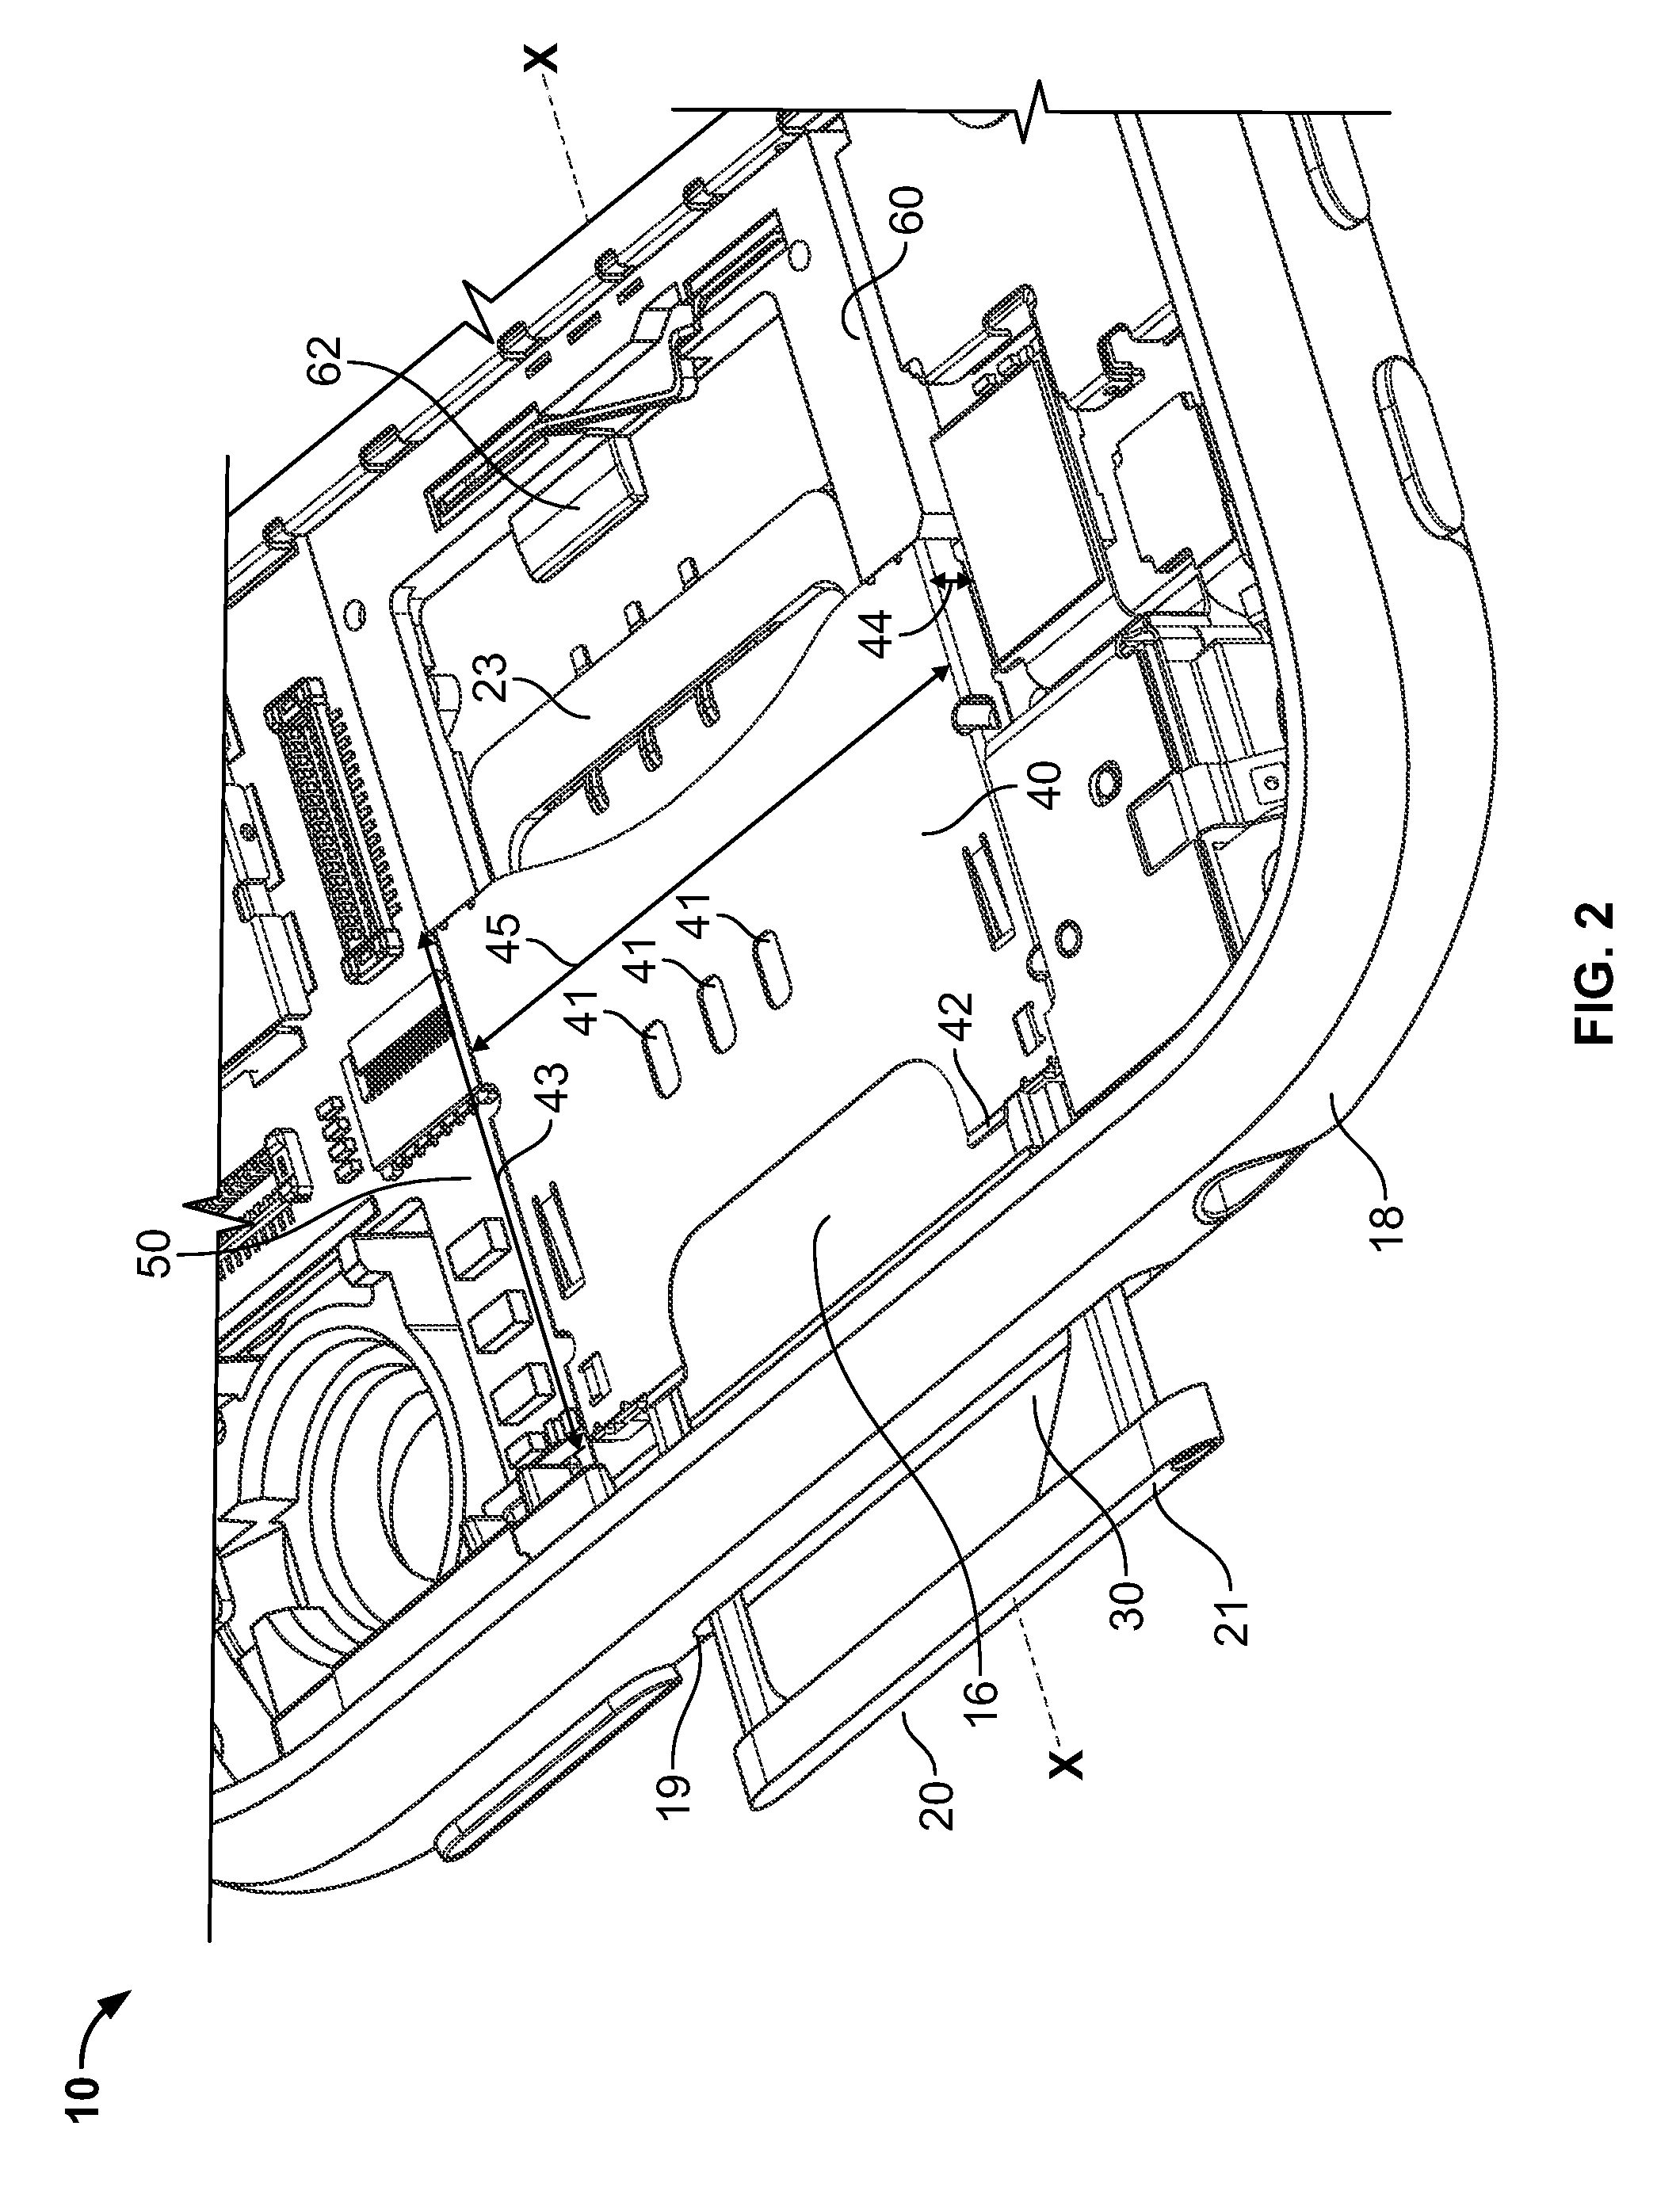 Compact ejectable component assemblies in electronic devices